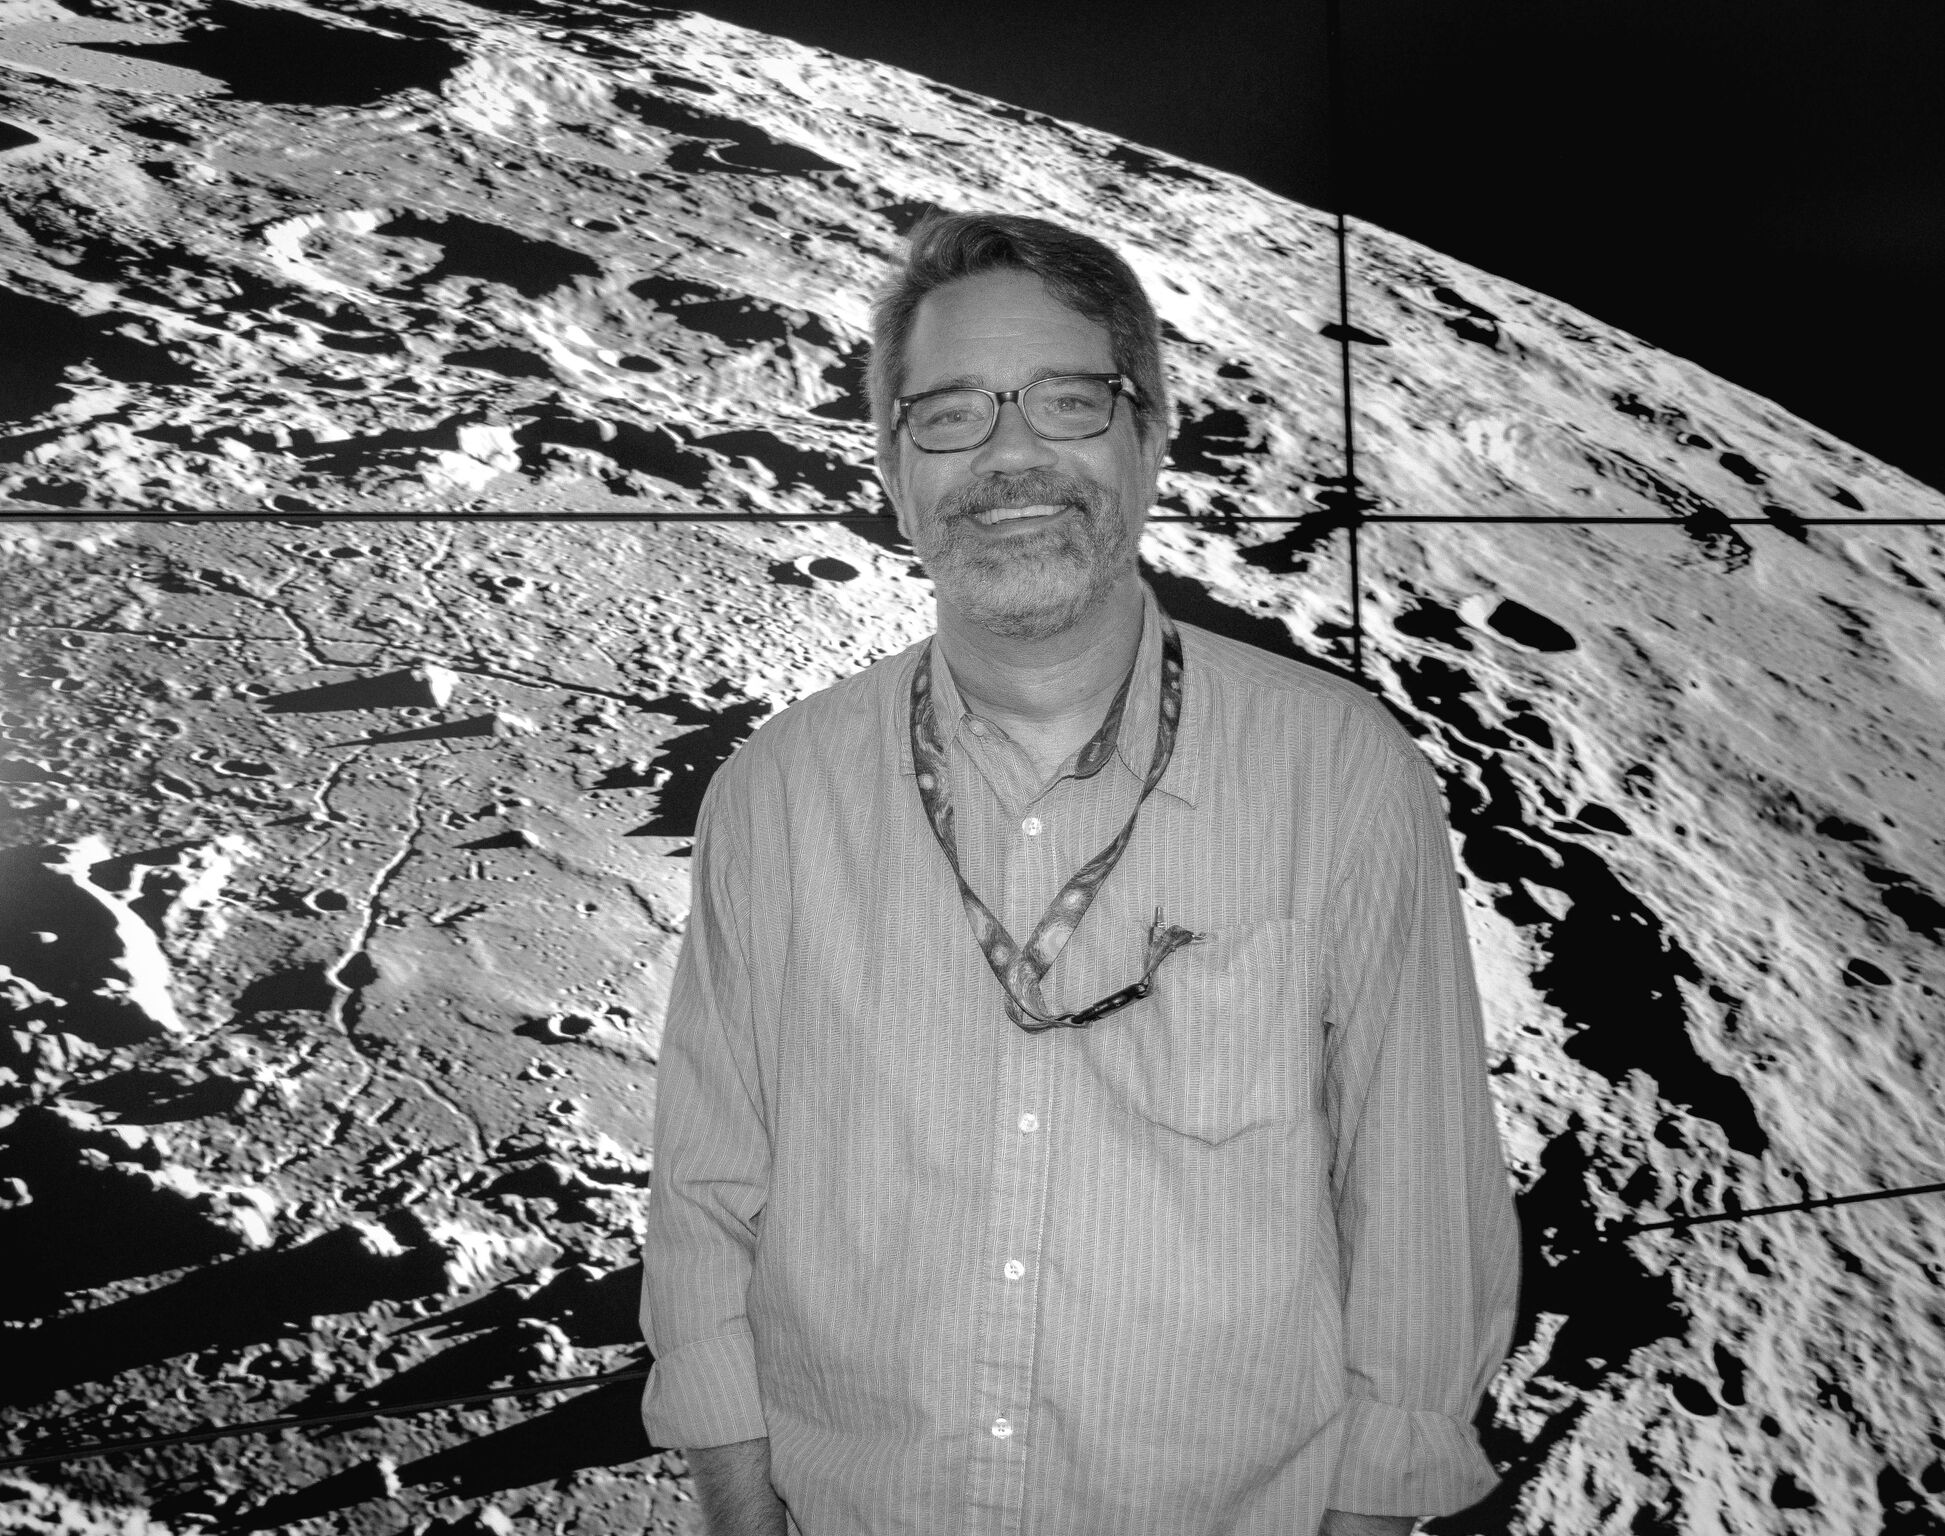 black and white image of man in front of moon image